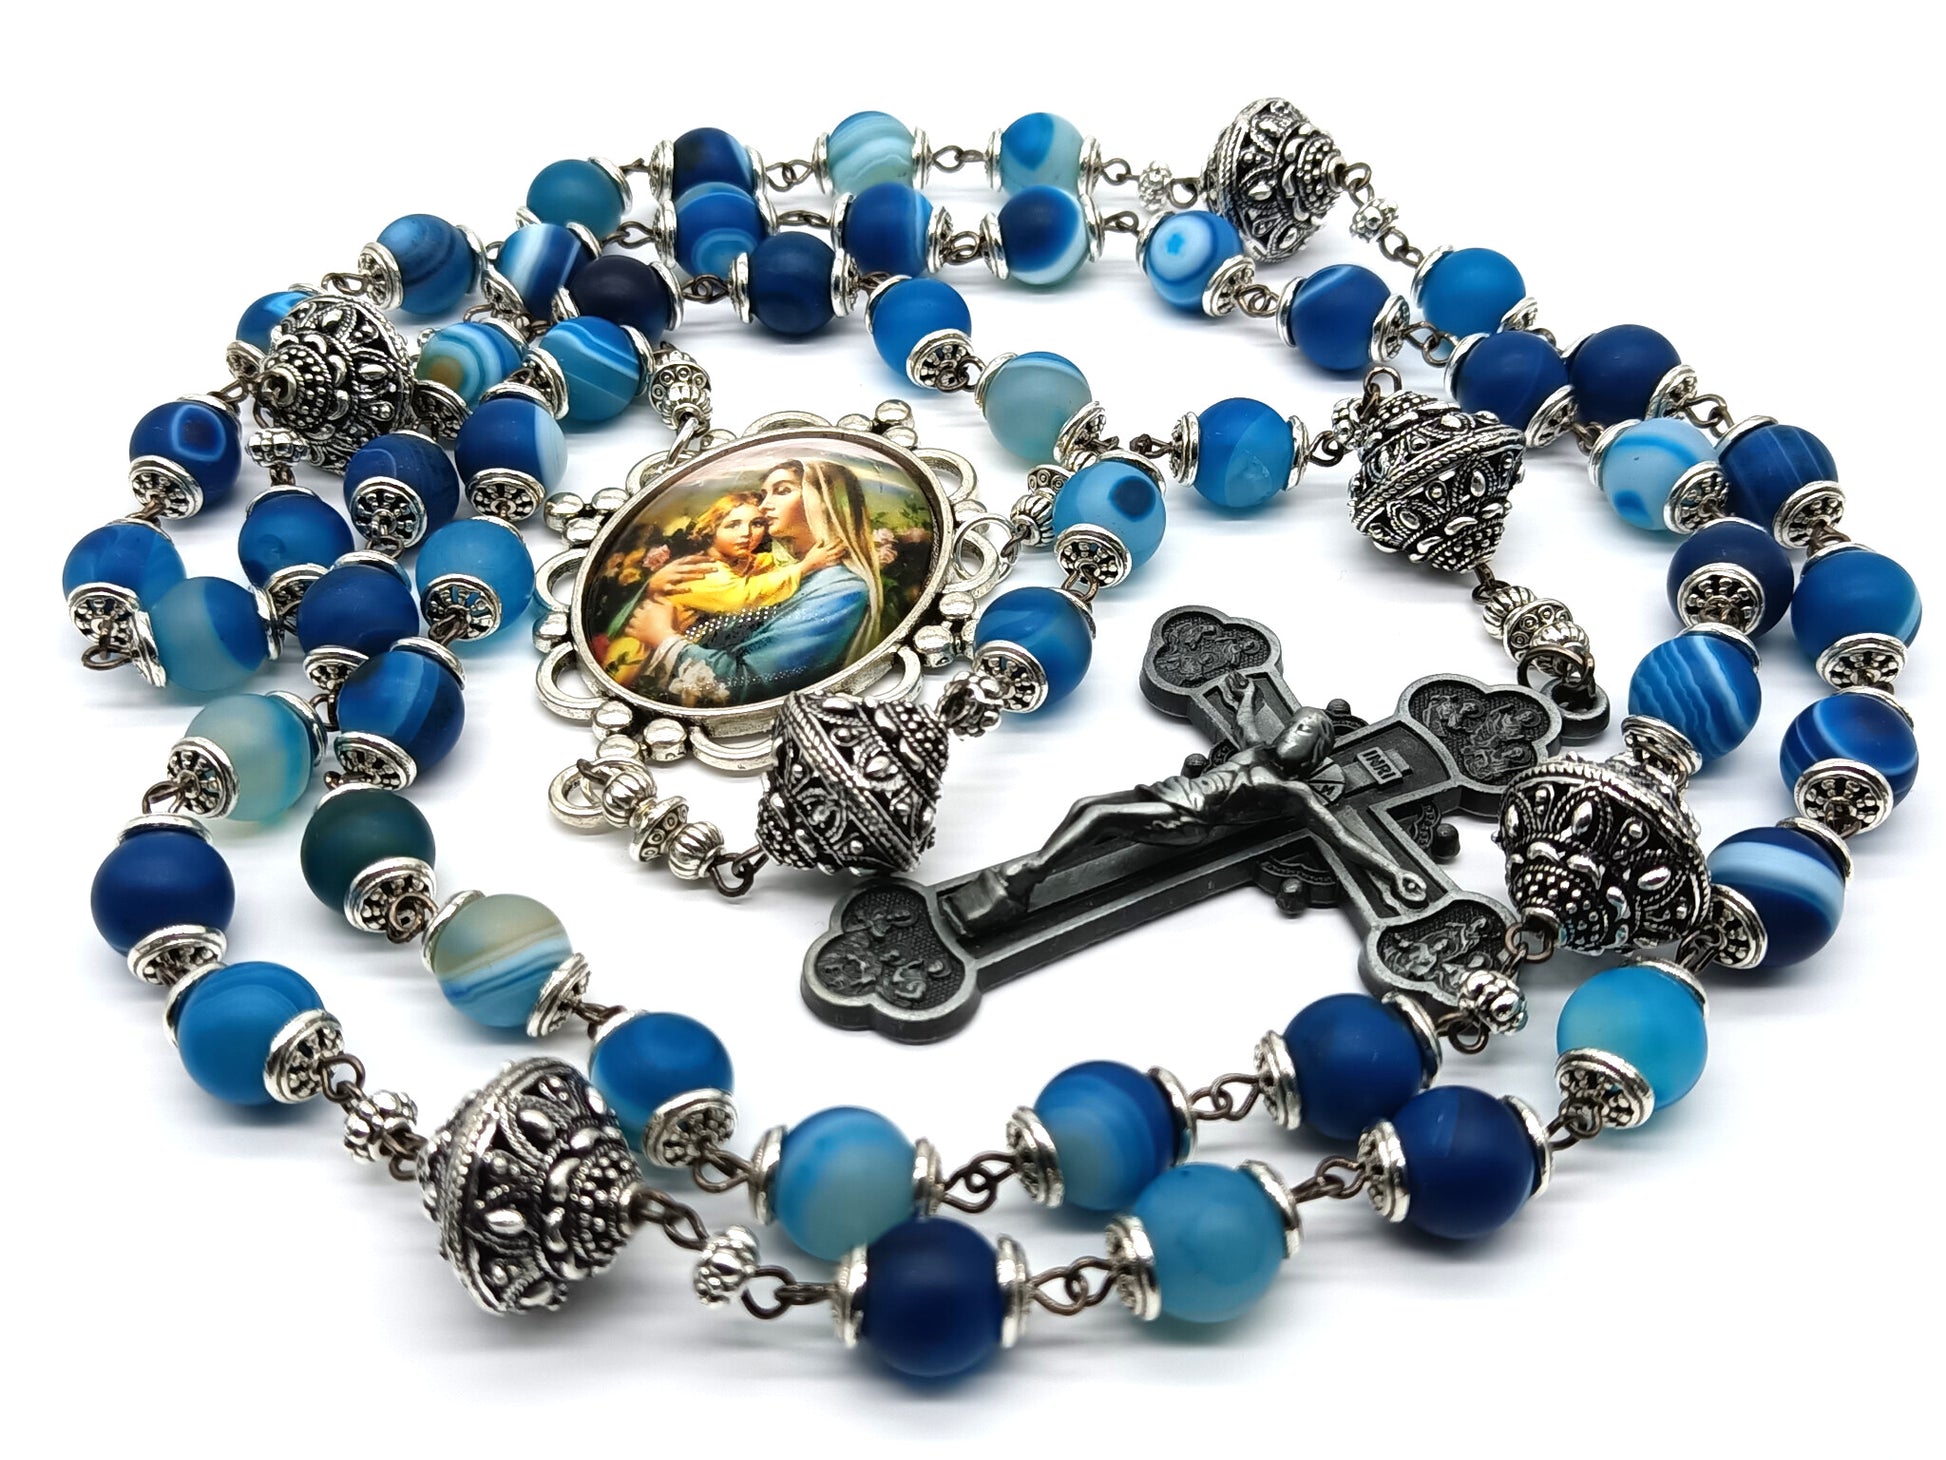 Virgin and Child unique rosary beads with blue gemstone beads, pewter crucifix, silver pater beads, bead caps and picture centre medal.